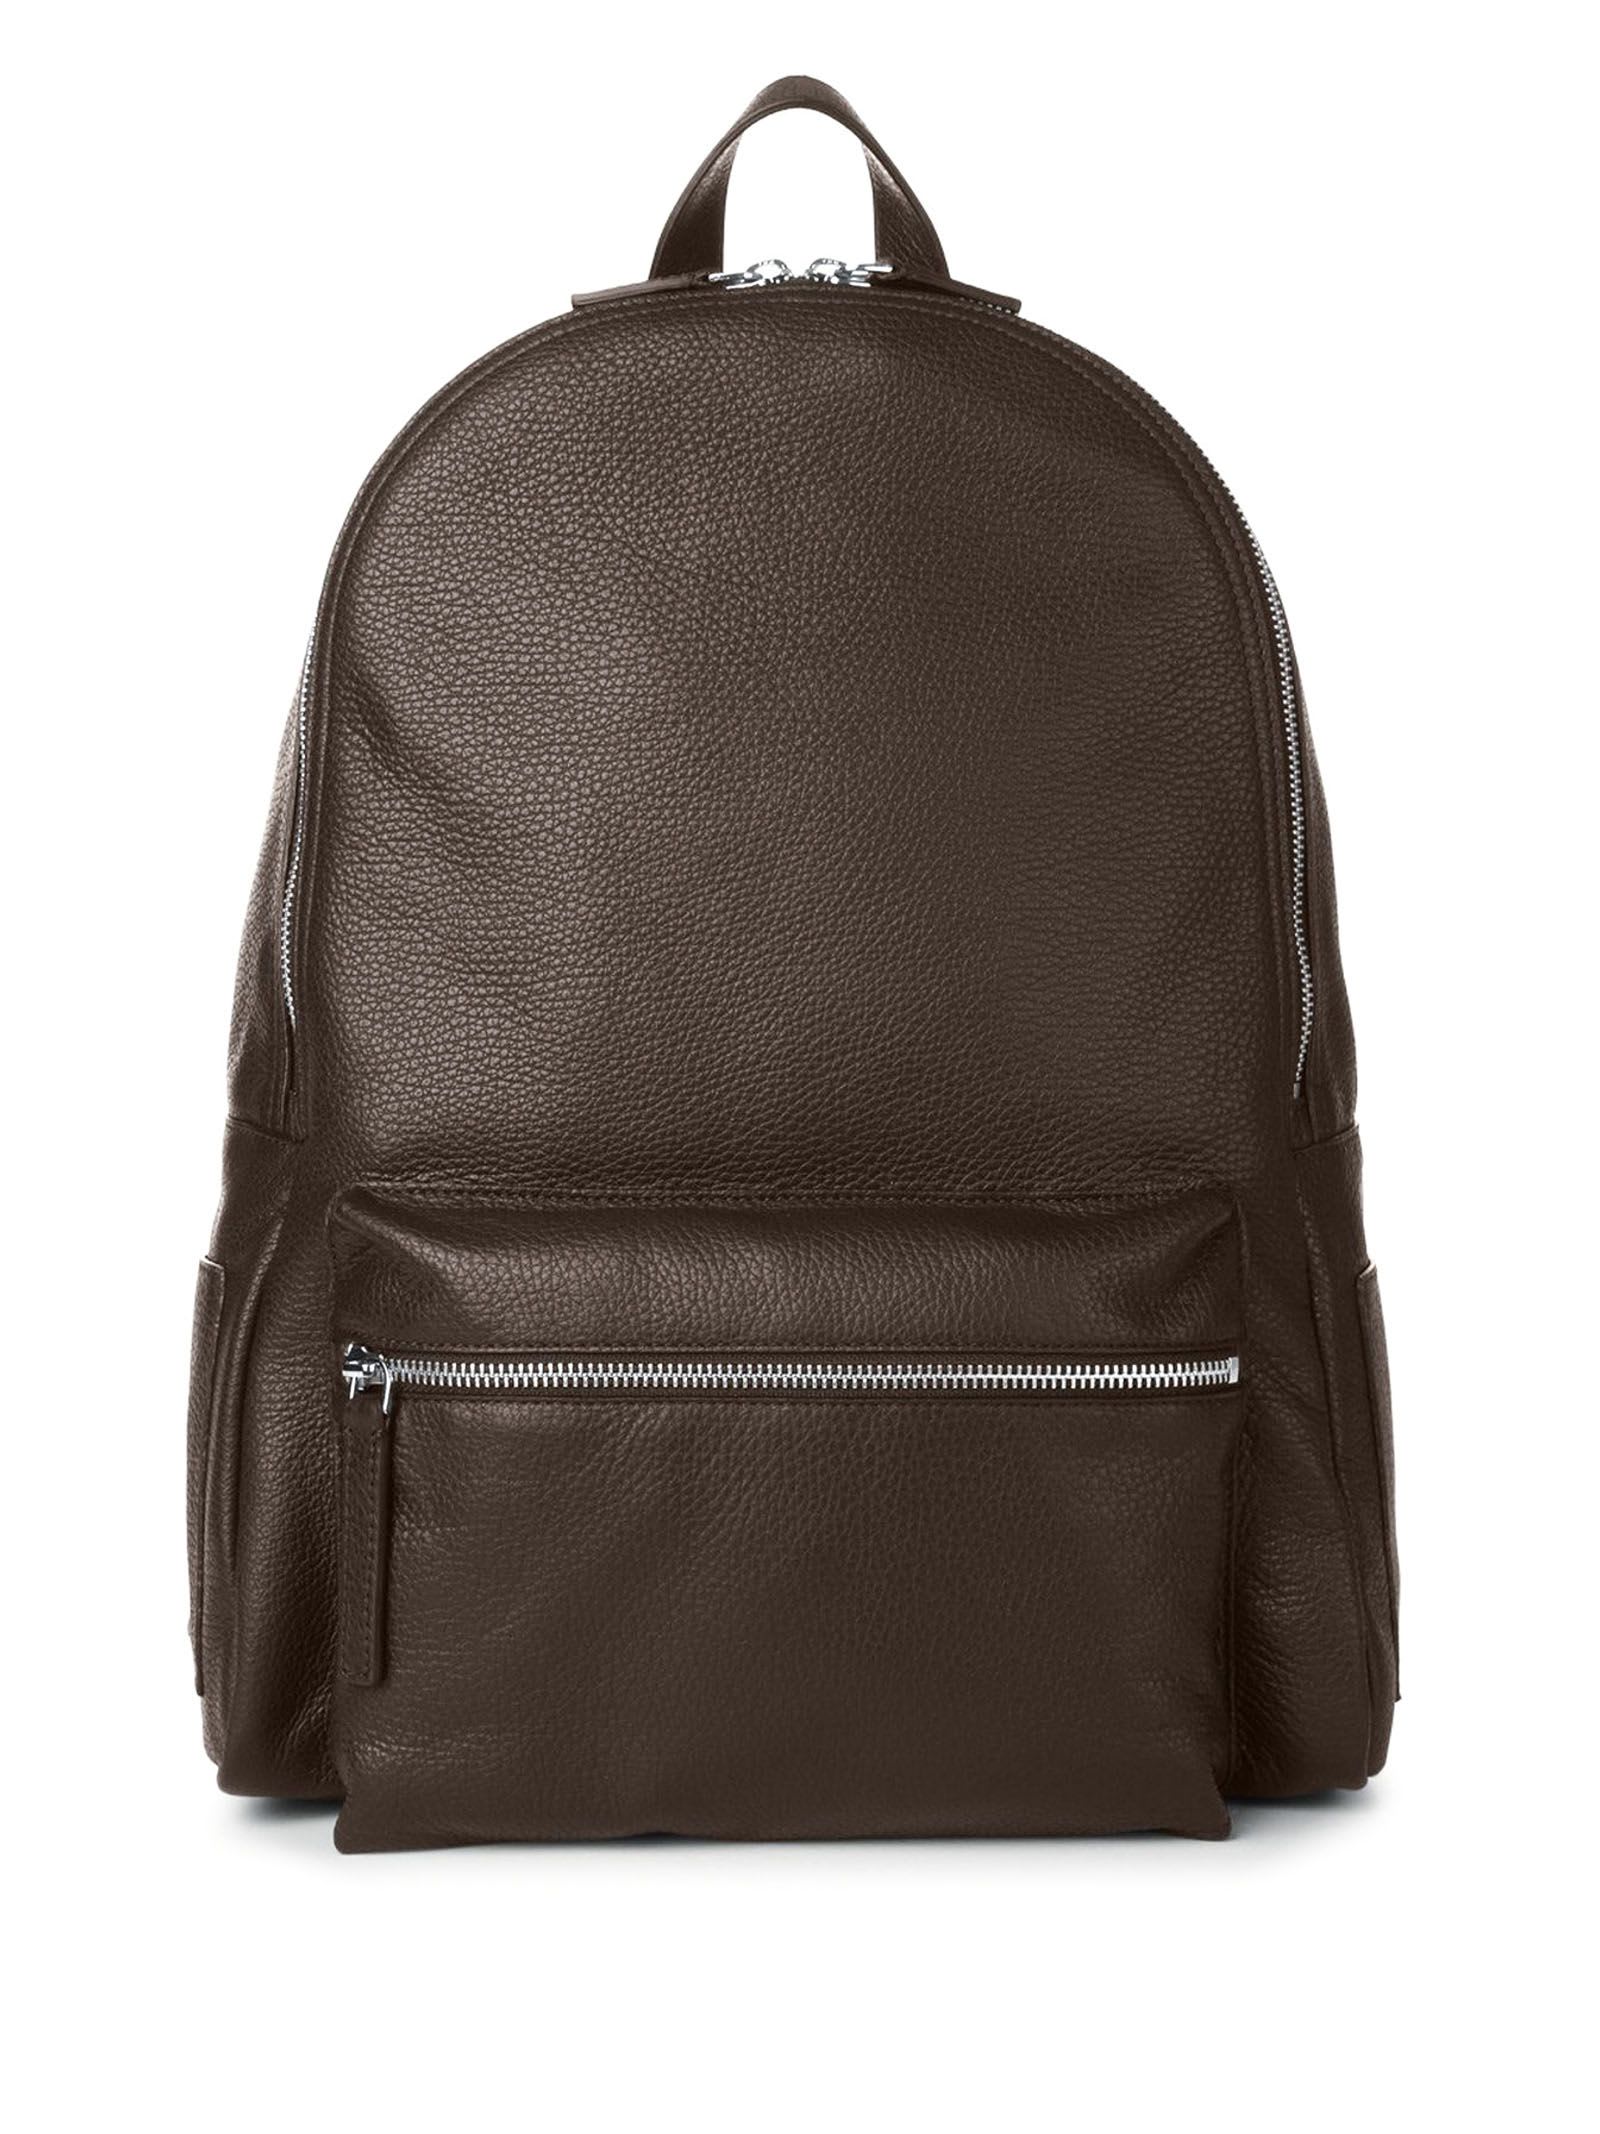 ORCIANI BROWN CALF LEATHER MICRON BACKPACK